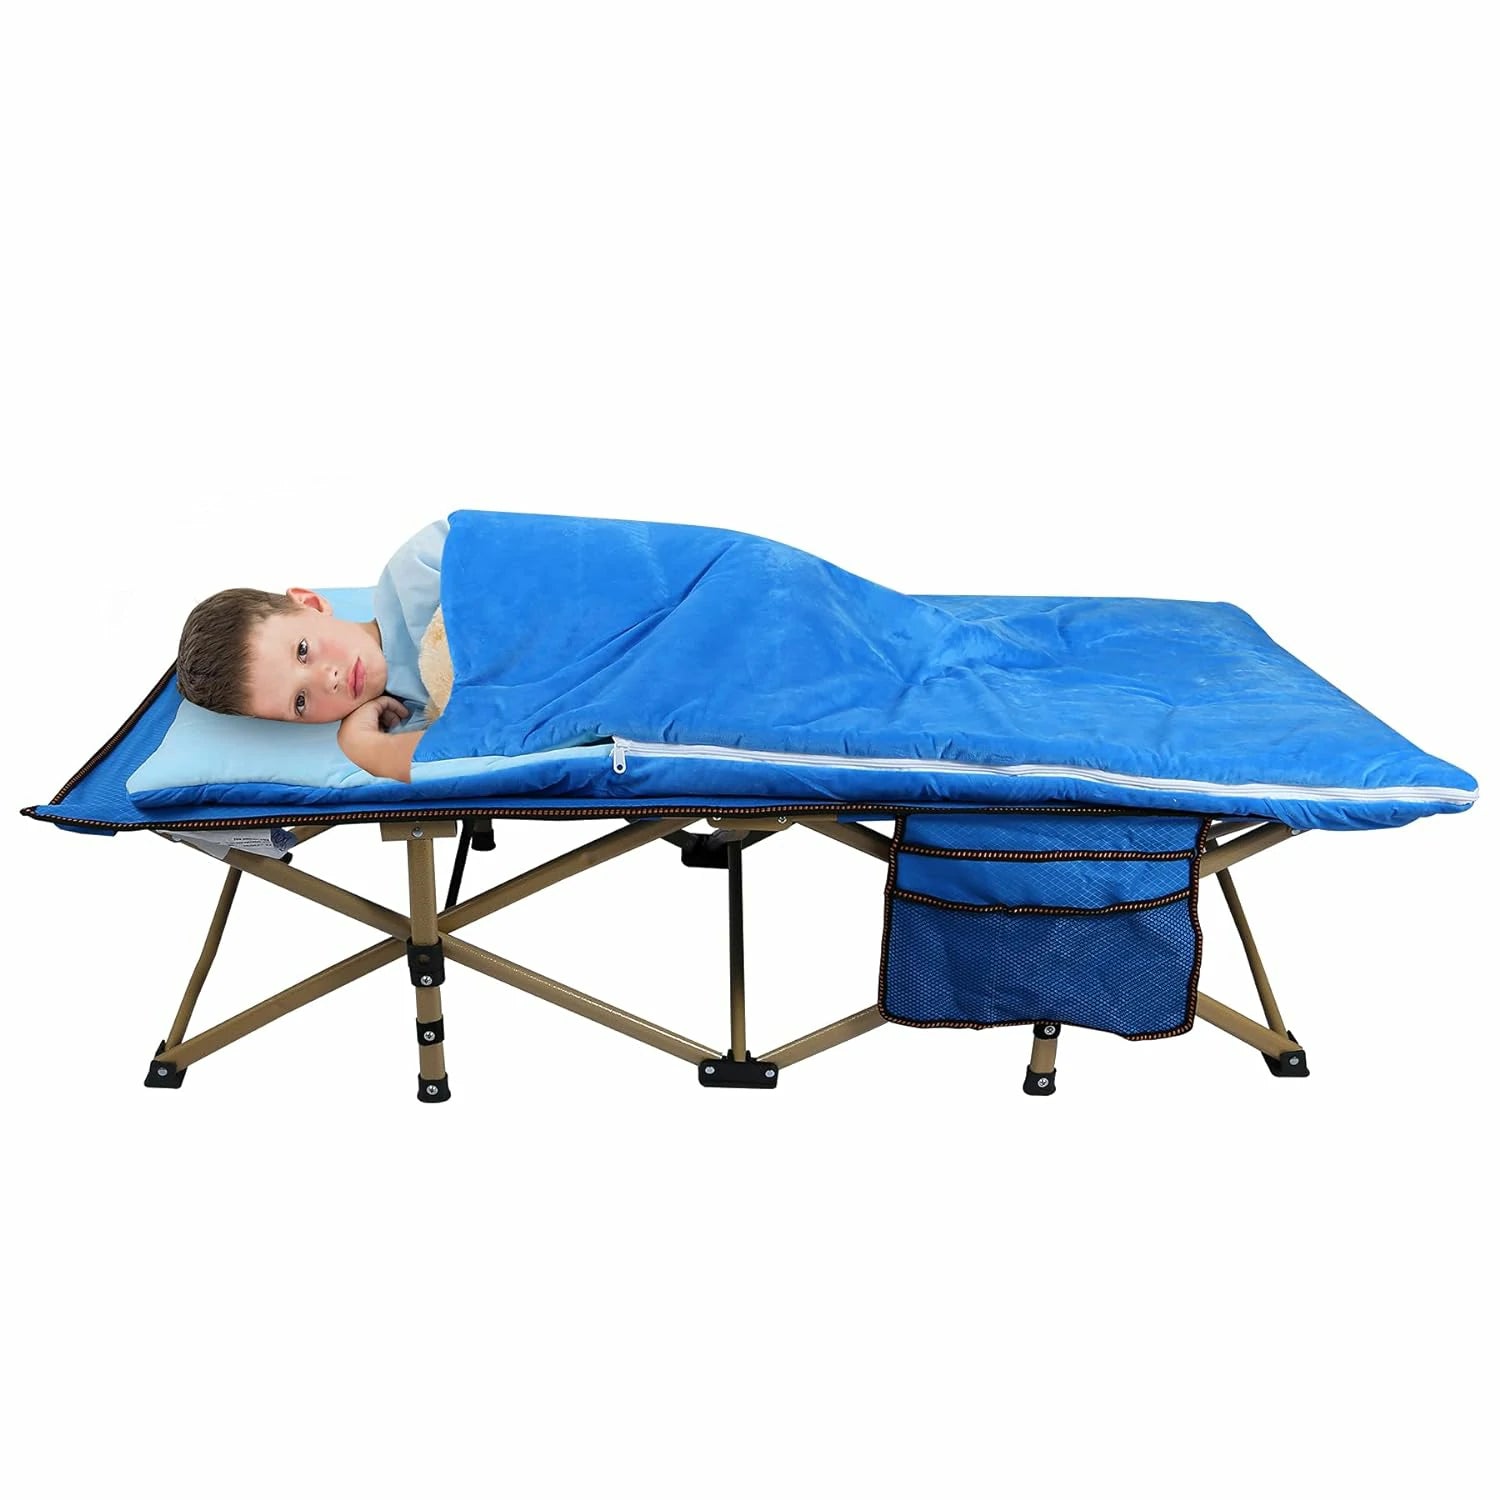 REDCAMP Extra Long Toddler cot with Sleeping Bag